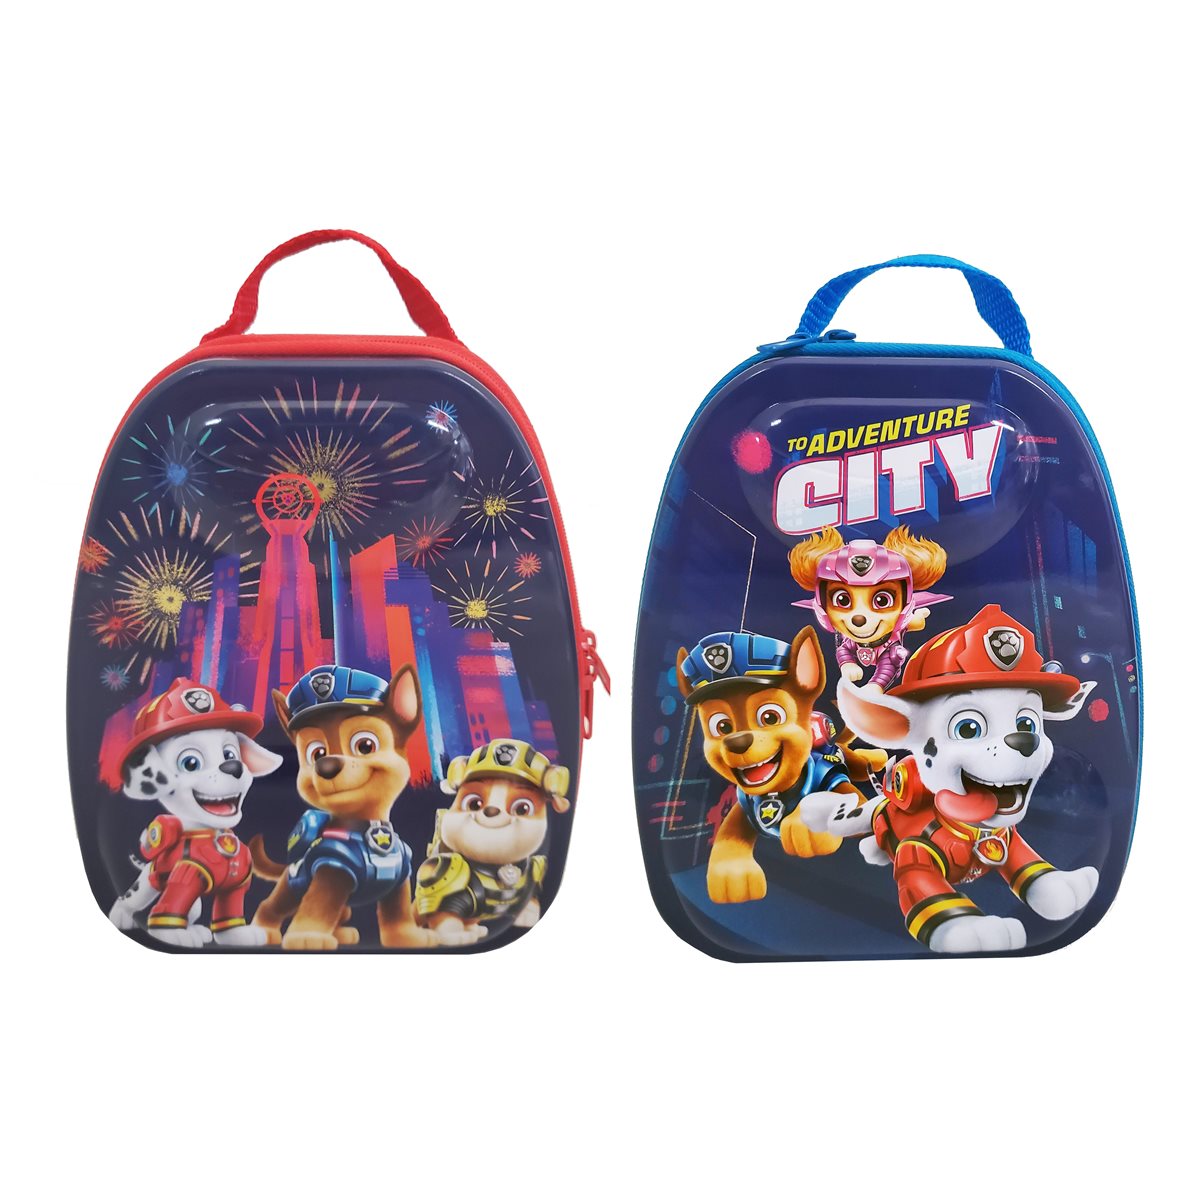 PAW Patrol Carry All Tin Lunch Box Set of 2